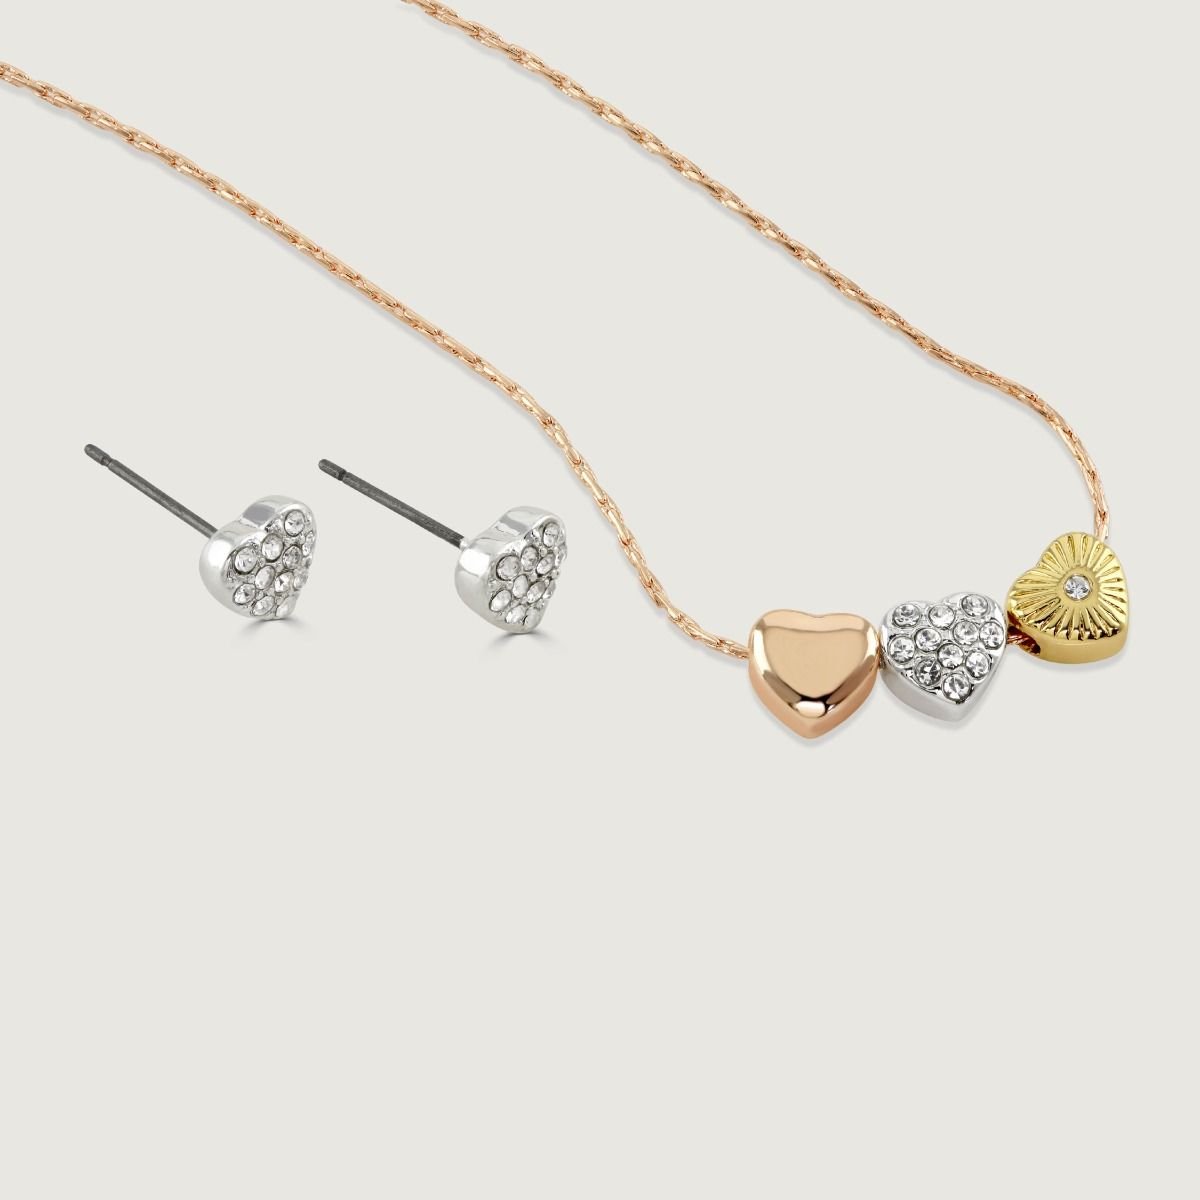 This sweet pendant and earrings set makes the perfect gift for someone special. The pendant features slender rose gold tone chain, decorated with a trio of beautiful heart charms in polished rose gold tone, silver tone with clear crystals, and gold tone w